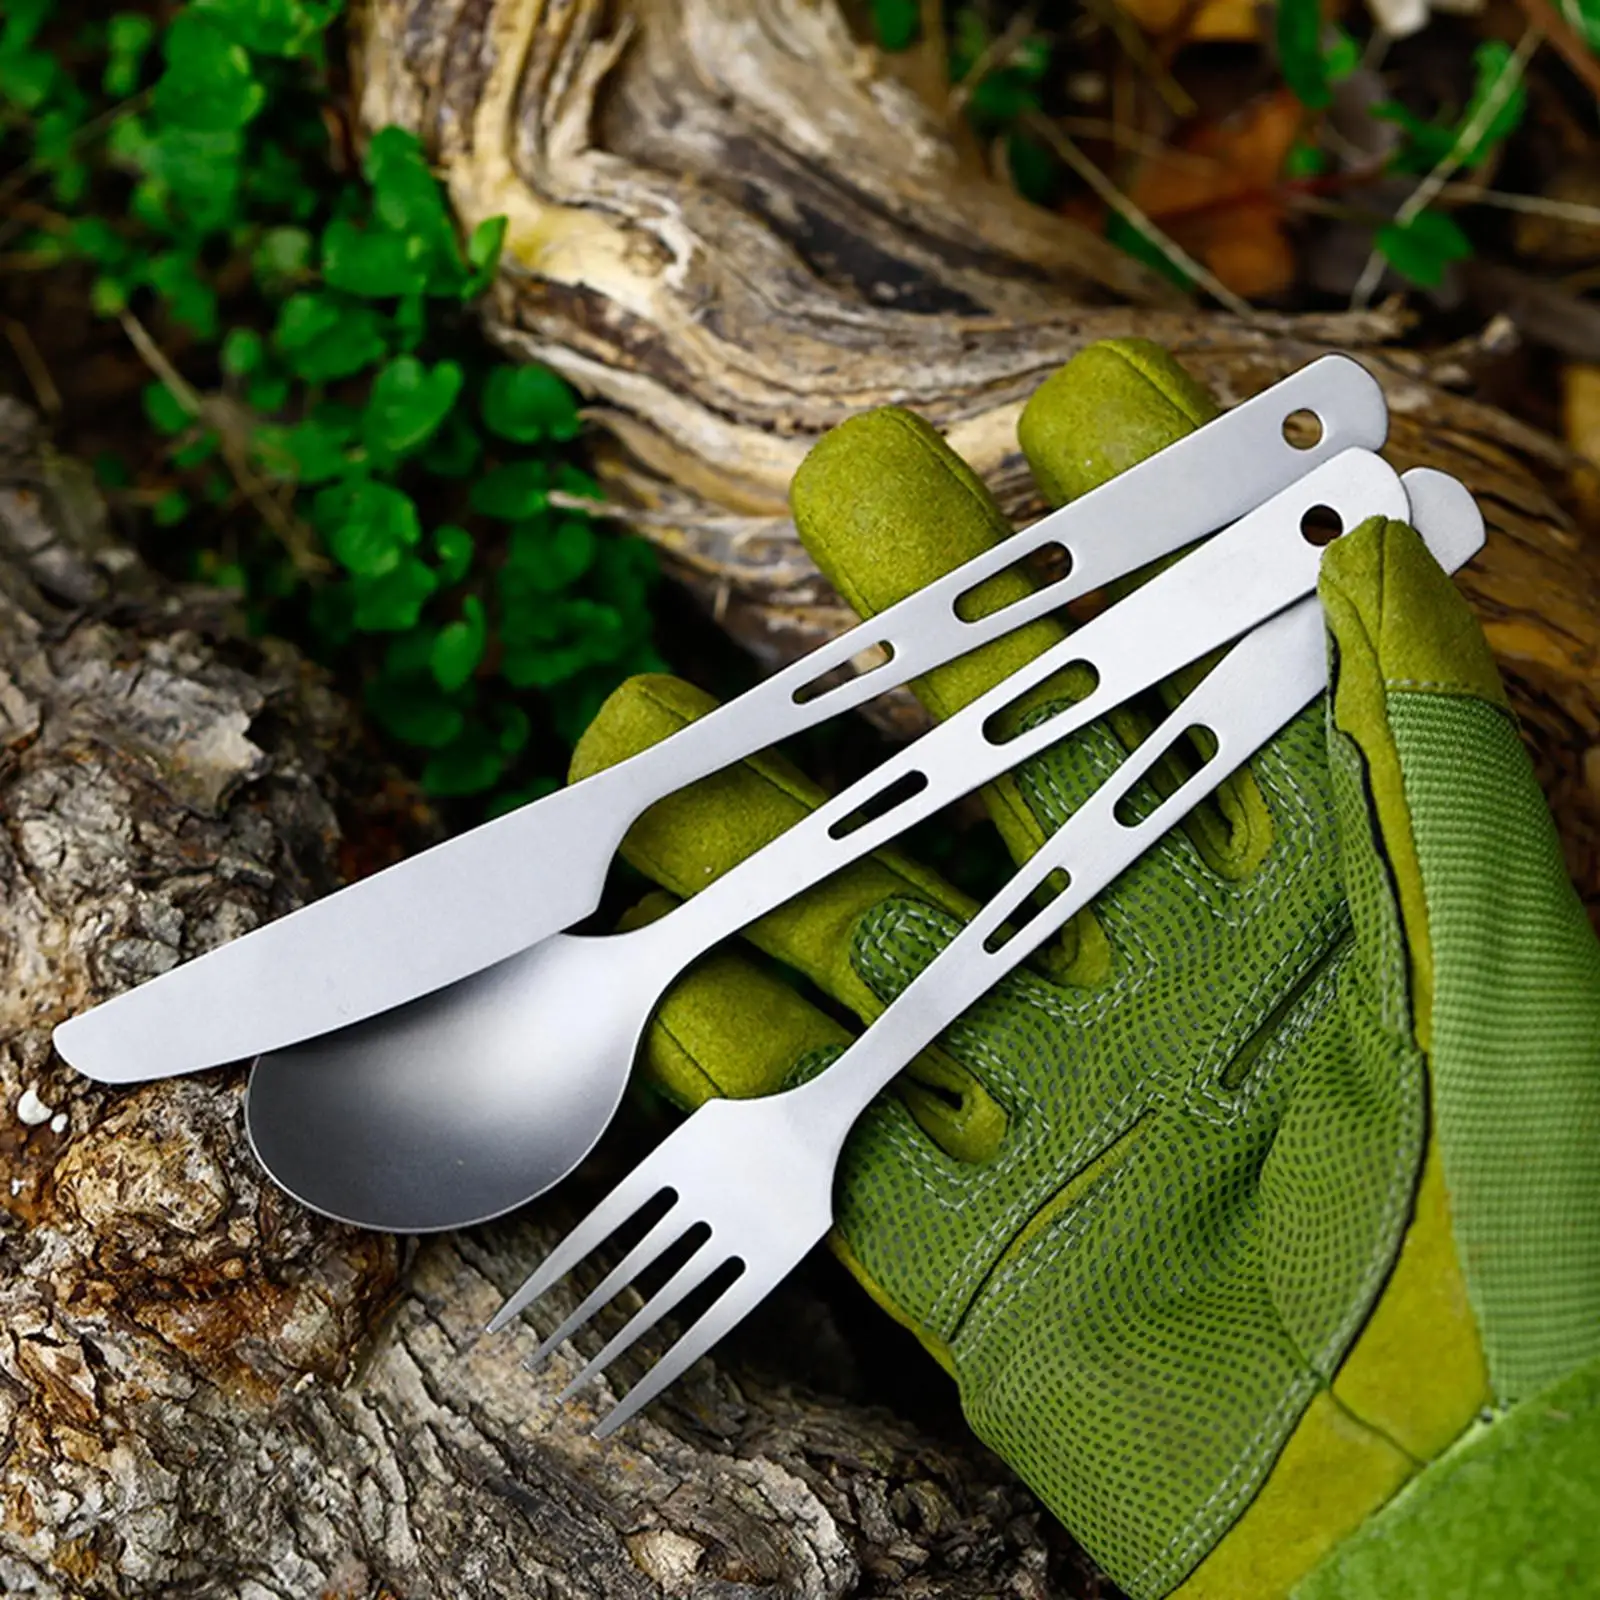 Camping Cutlery Set with Carabiner and Bag Picnic Tools Spoon Fork Knife for Outdoor